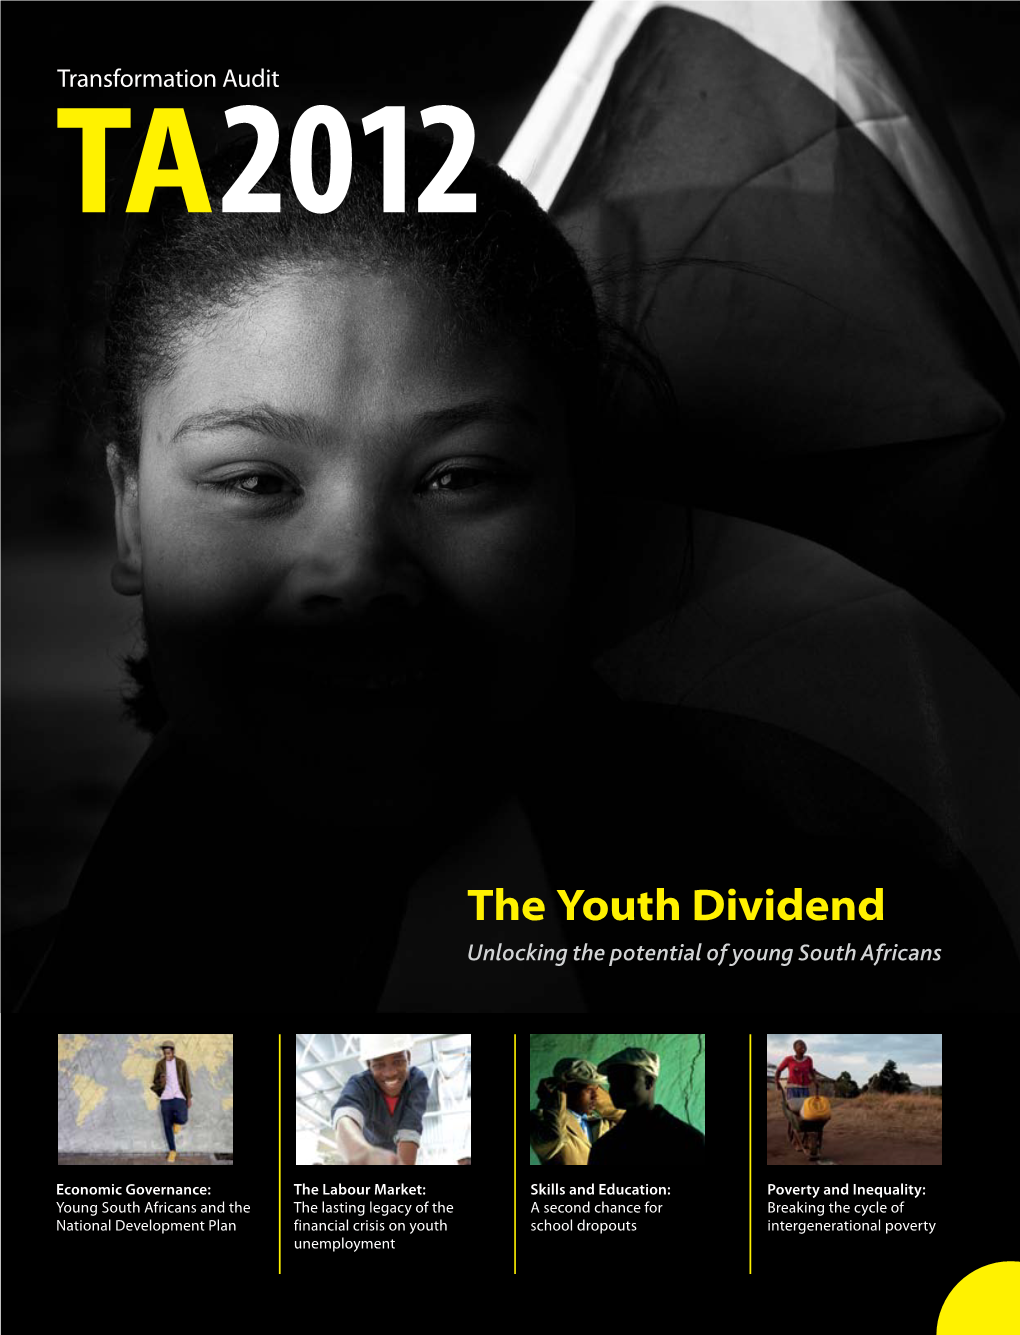 The Youth Dividend. Unlocking the Potential of Young South Africans